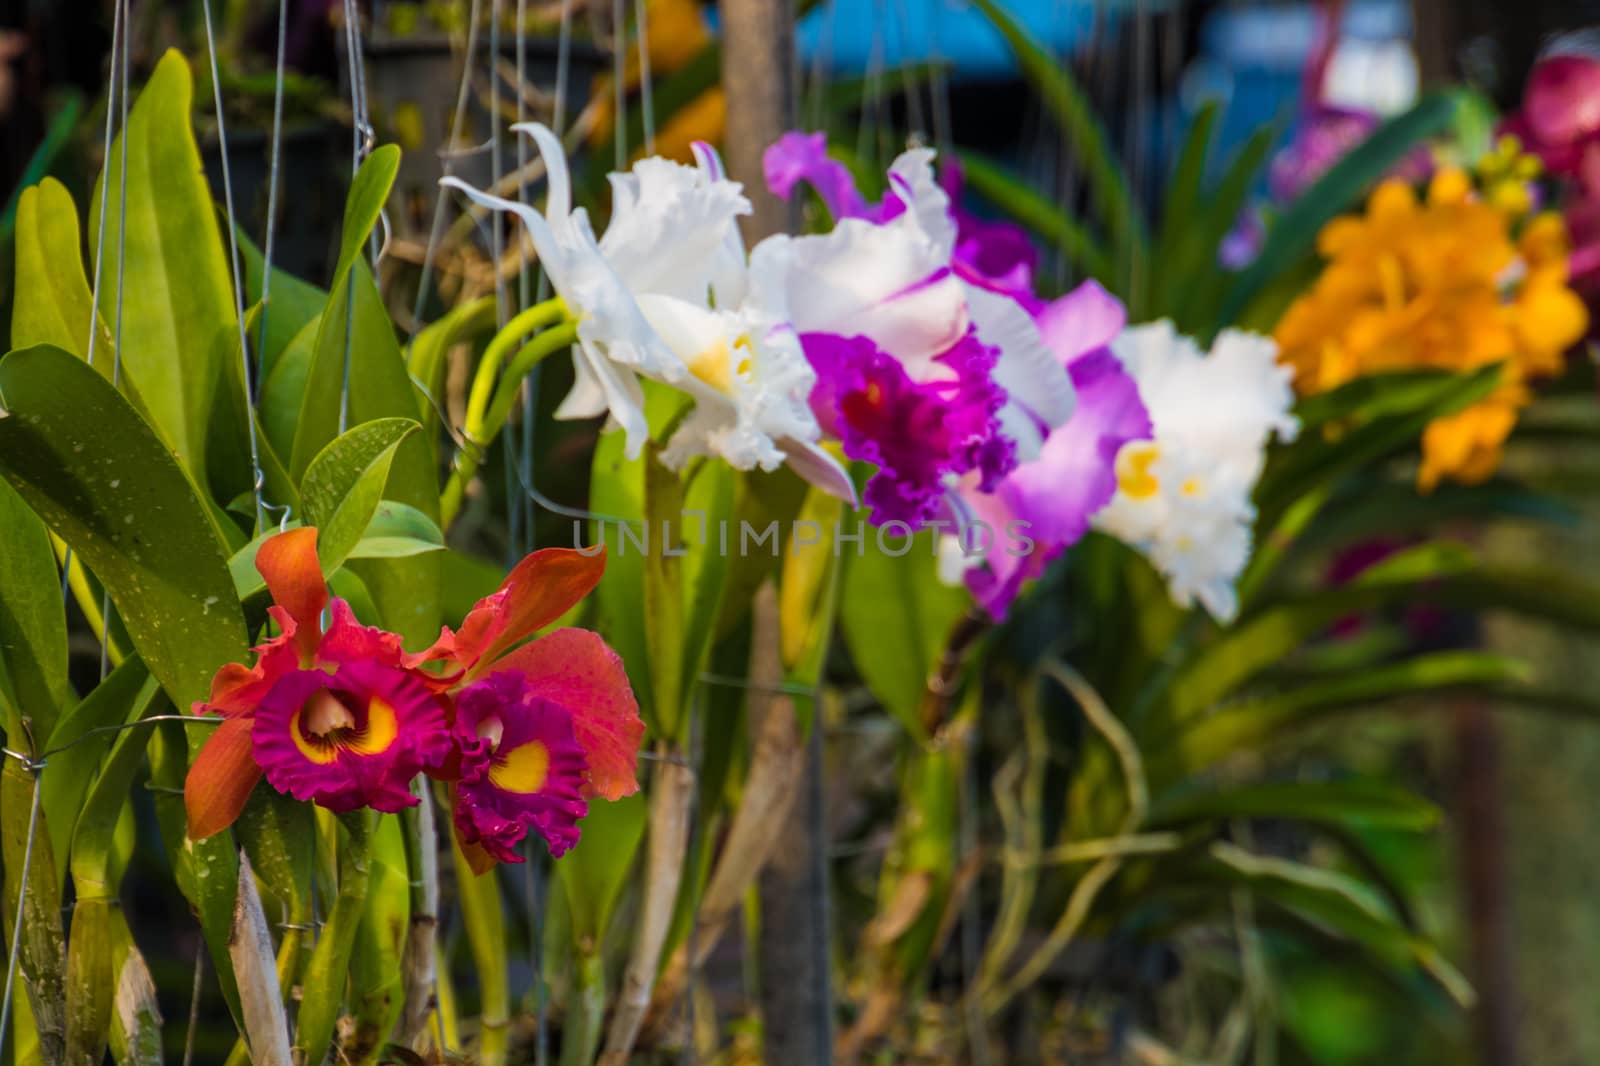 Orchids red, purple, white, yellow sold on Thai flower market by MXW_Stock